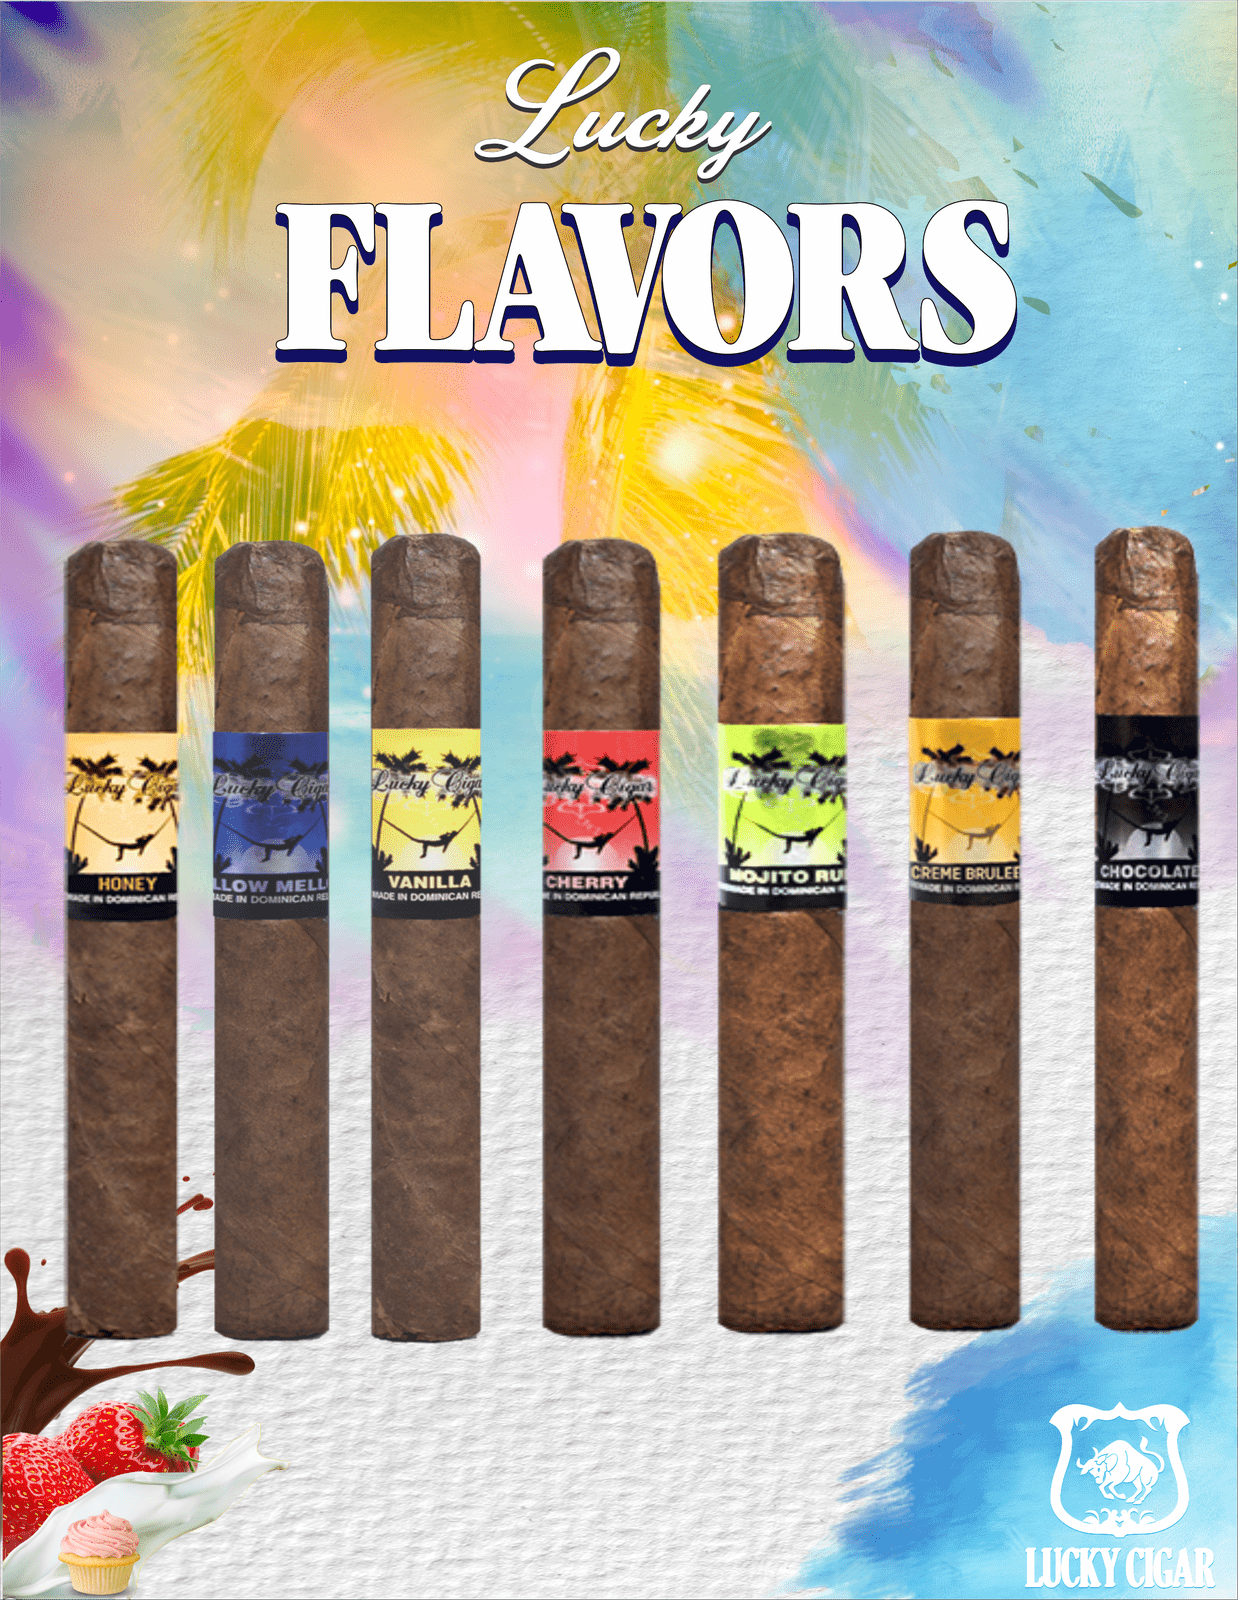 flavored cigars good